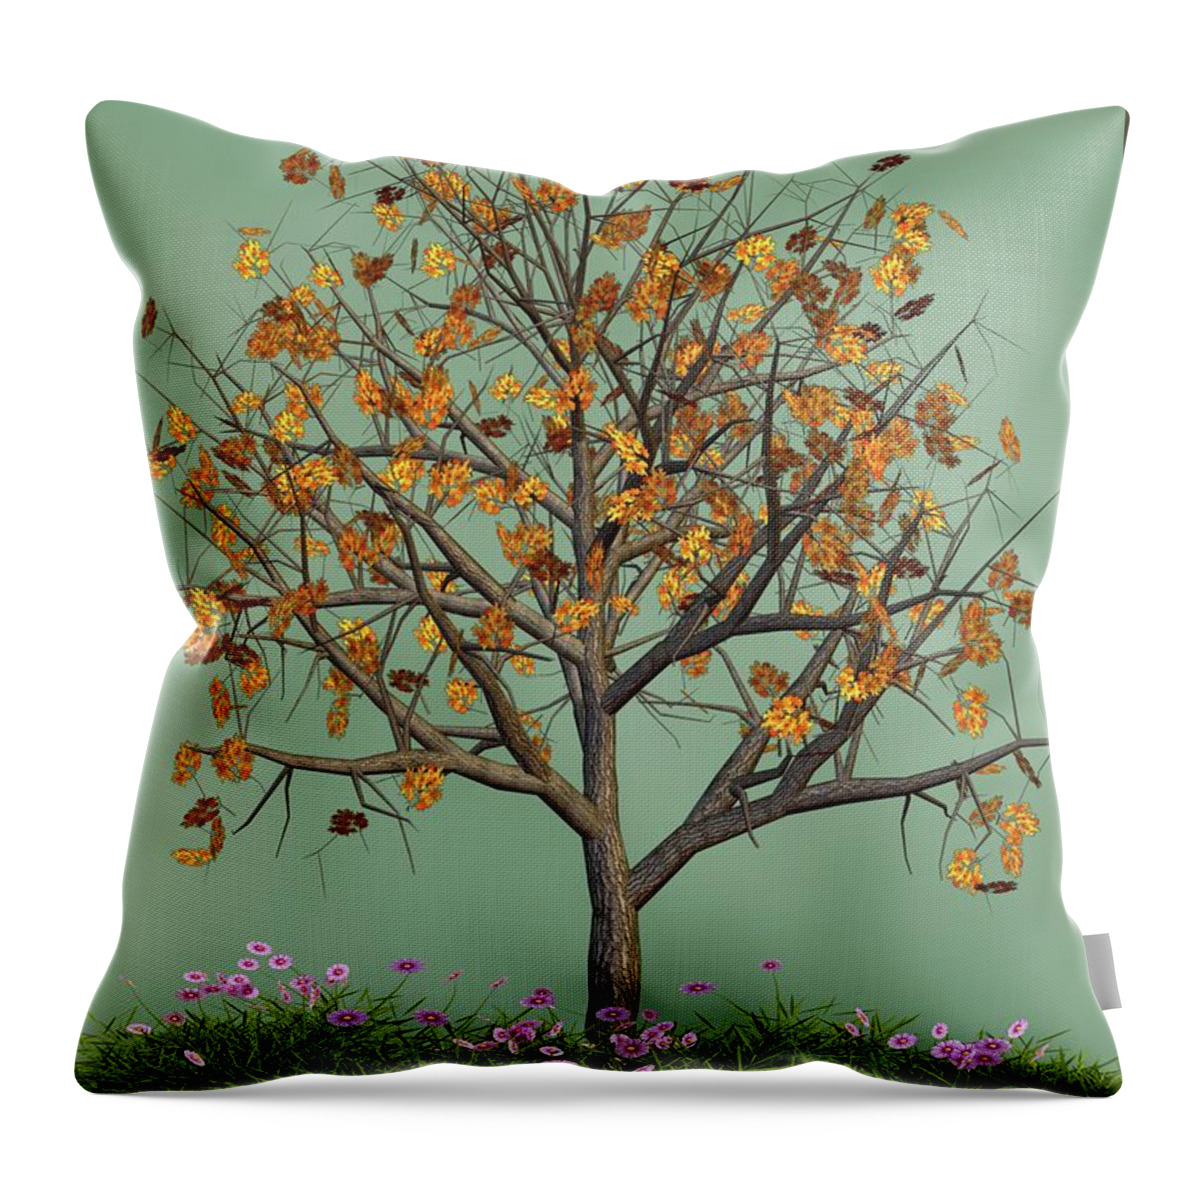 Autumn Throw Pillow featuring the mixed media Flowers Beneath The Autumn Tree by David Dehner